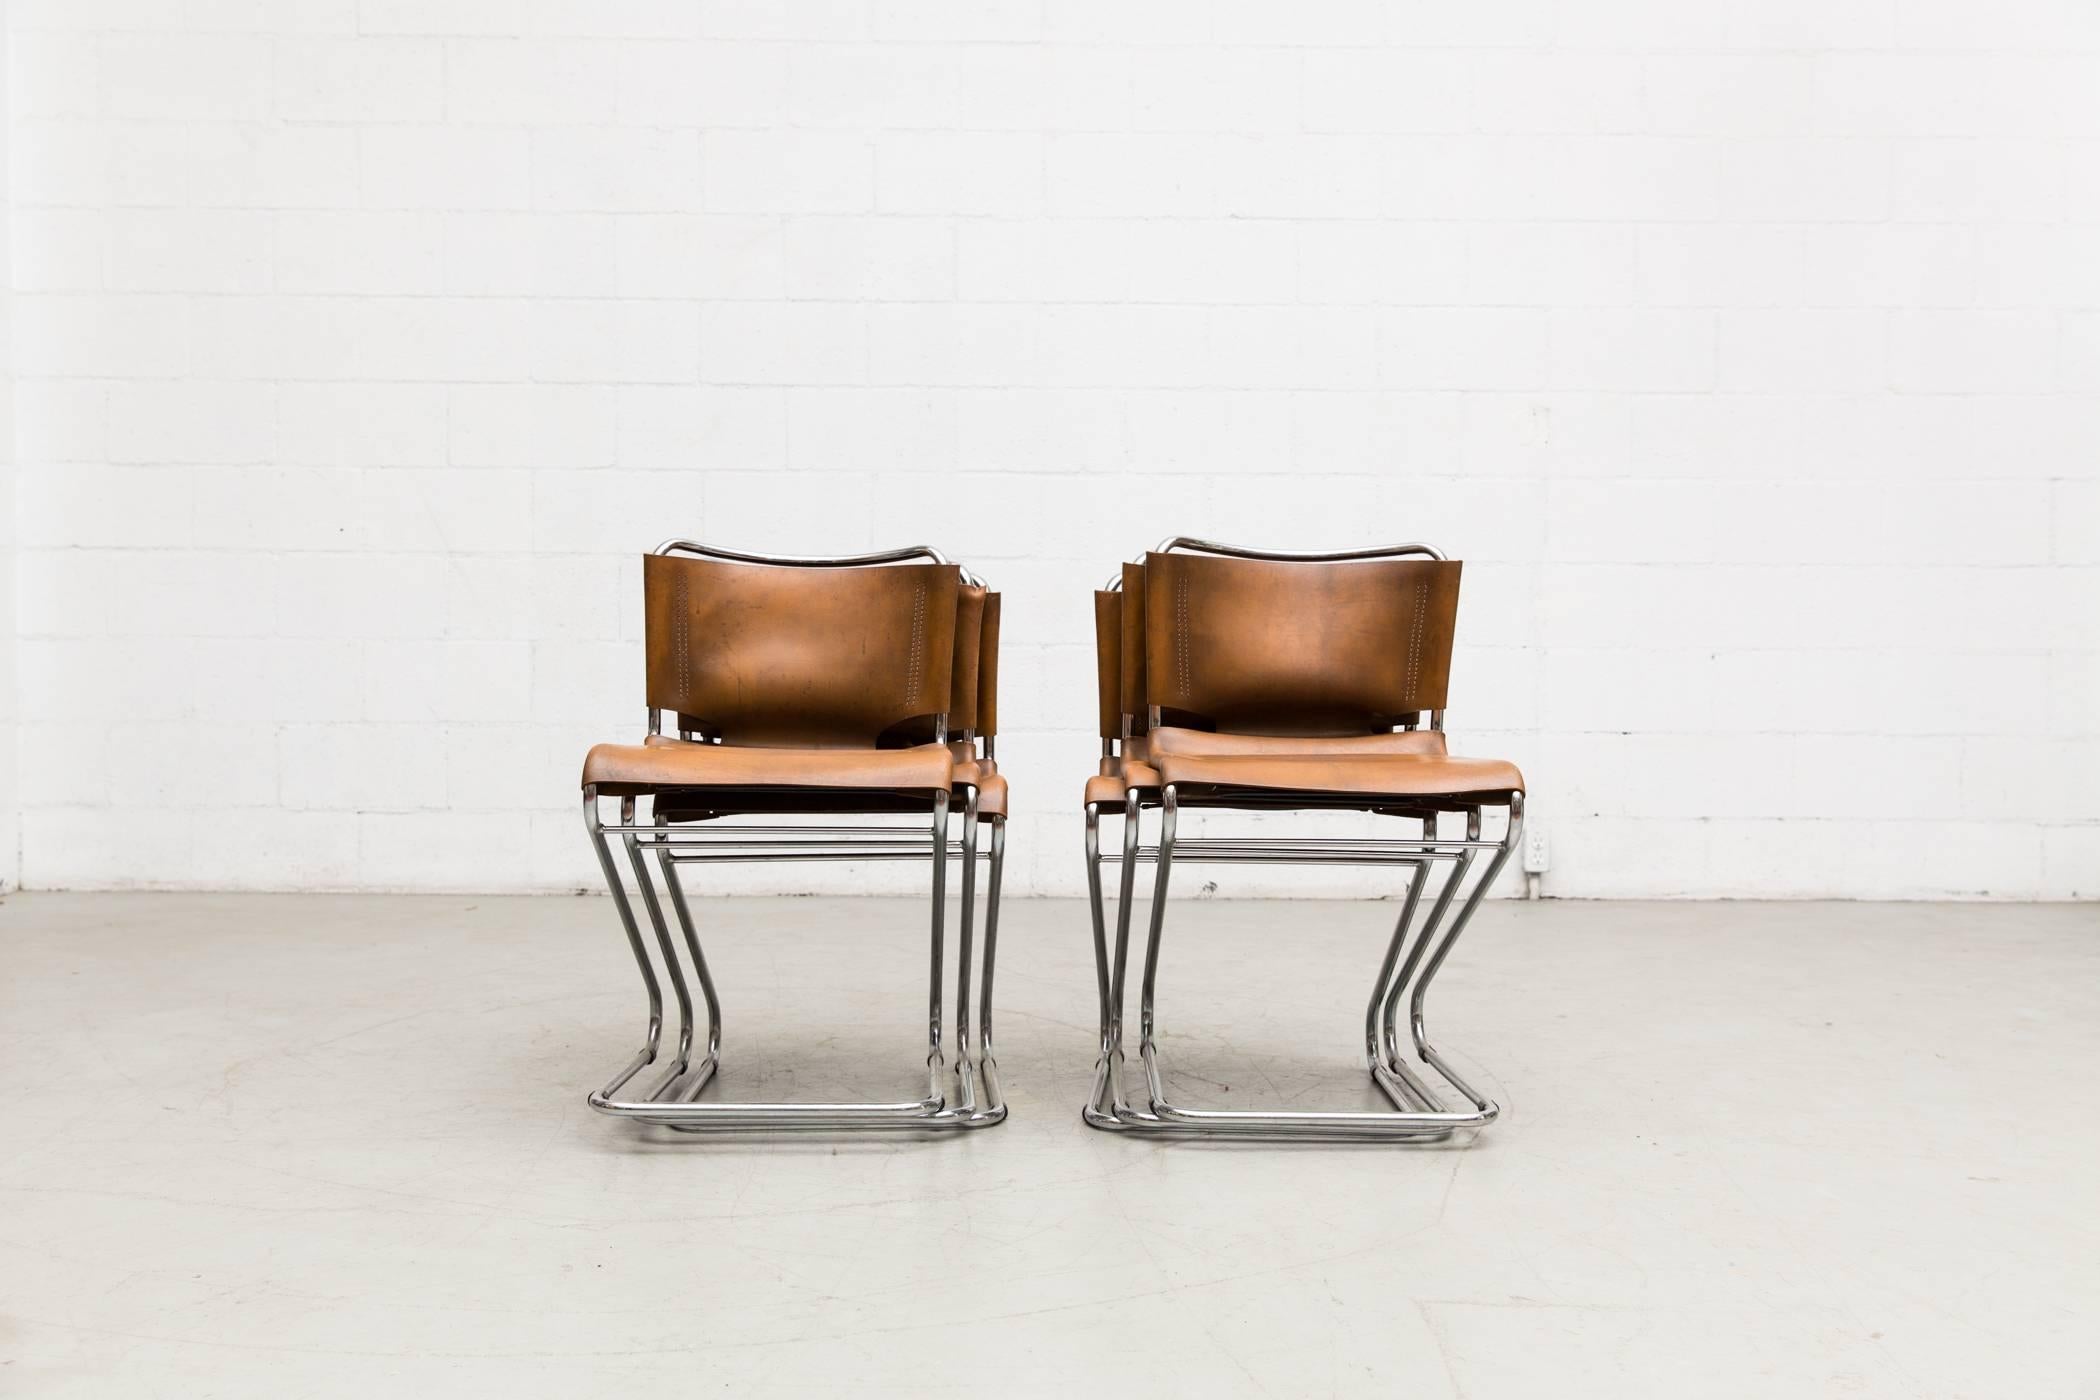 Zig zag shaped chrome tubular framed marcel Breuer style chairs with original natural leather seating. In original condition with amazing patina. Set price.